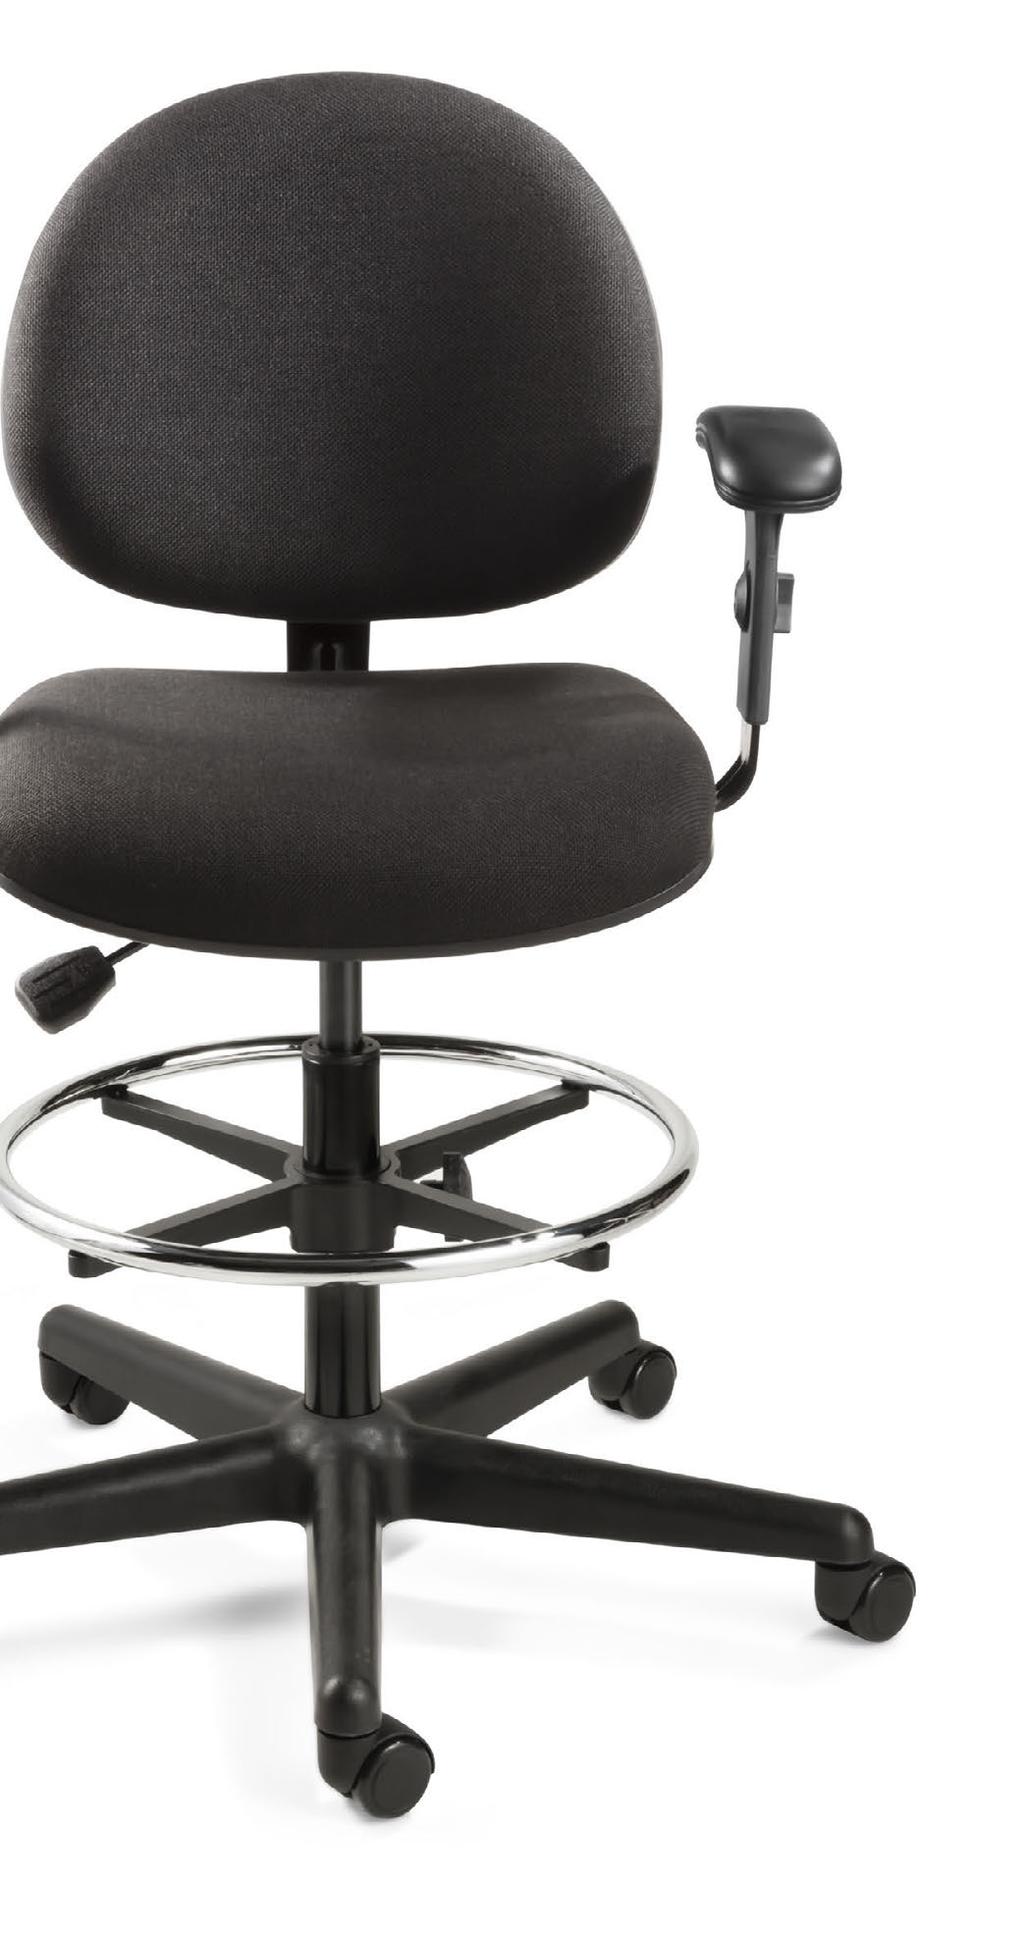 UPHOLSTERED CHAIRS V4 Series LEXINGTON BEVCO s VALUE-LINE LEXINGTON series delivers all of the outstanding ergonomic